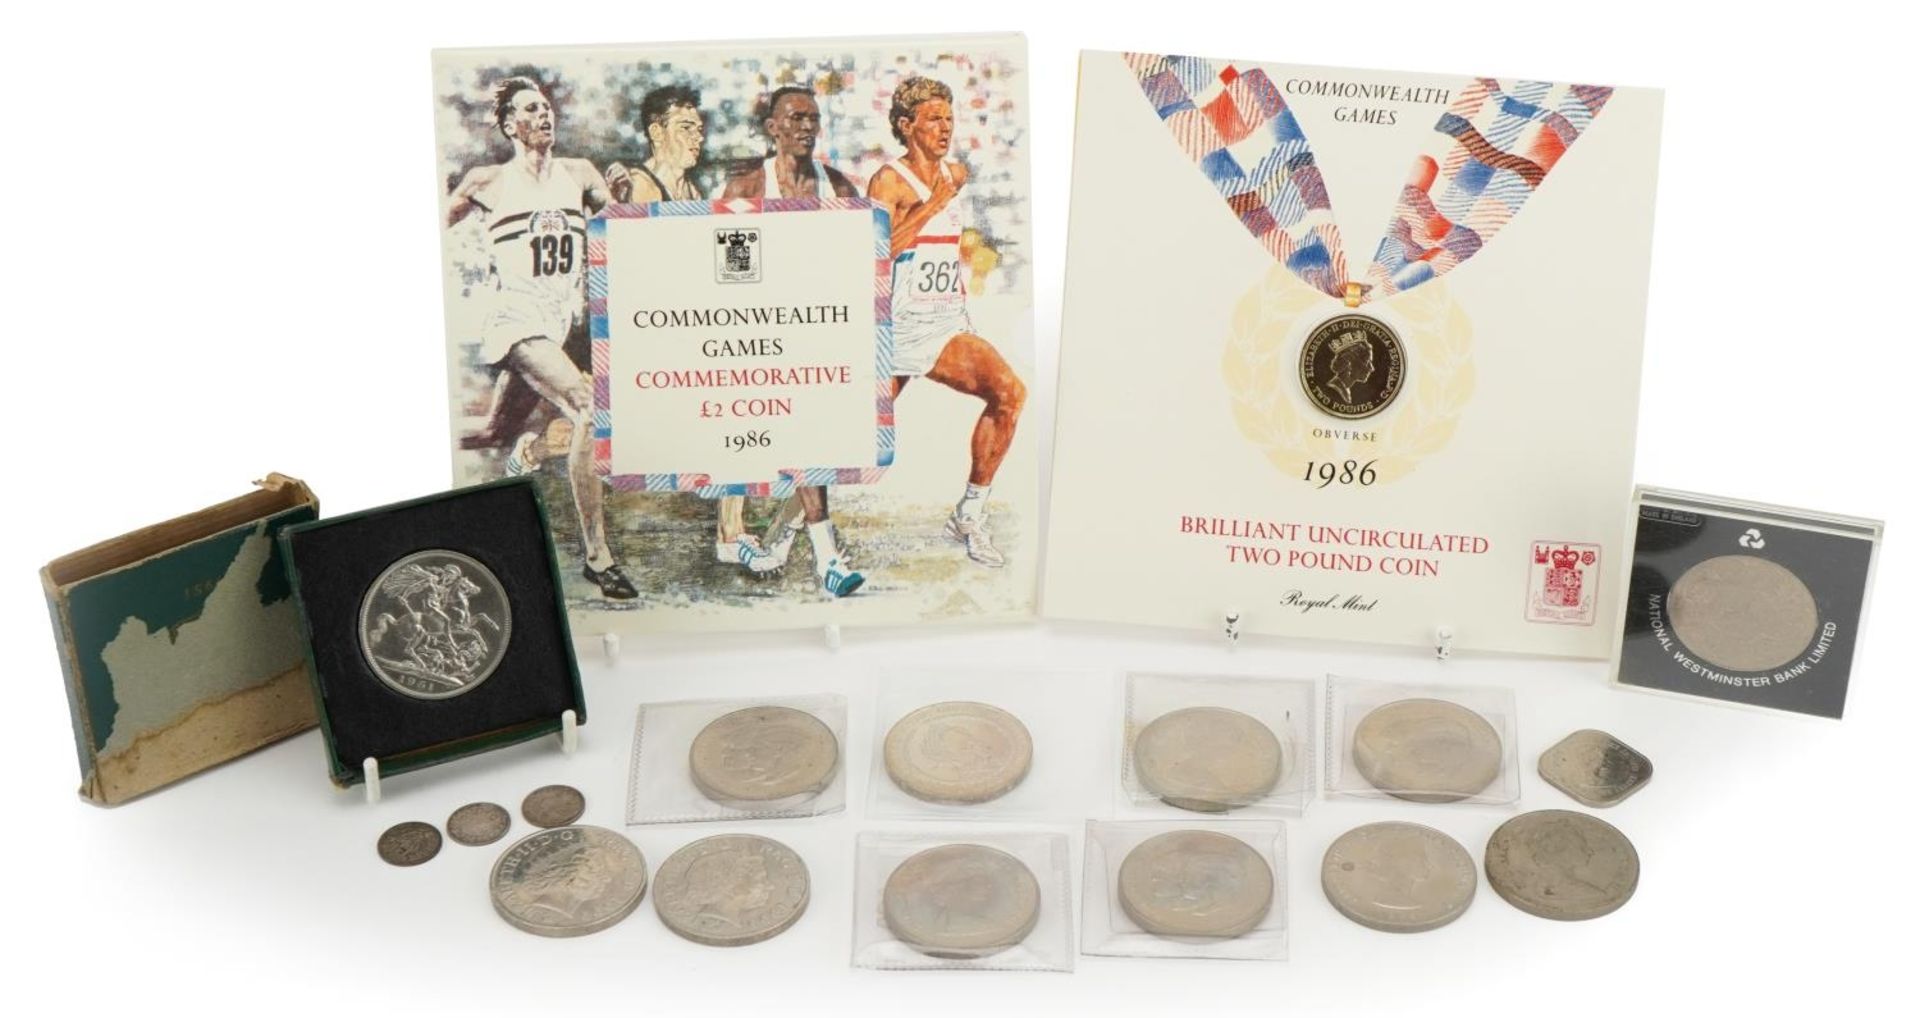 British coins including three commemorative five pound coins, Commonwealth Games commemorative two